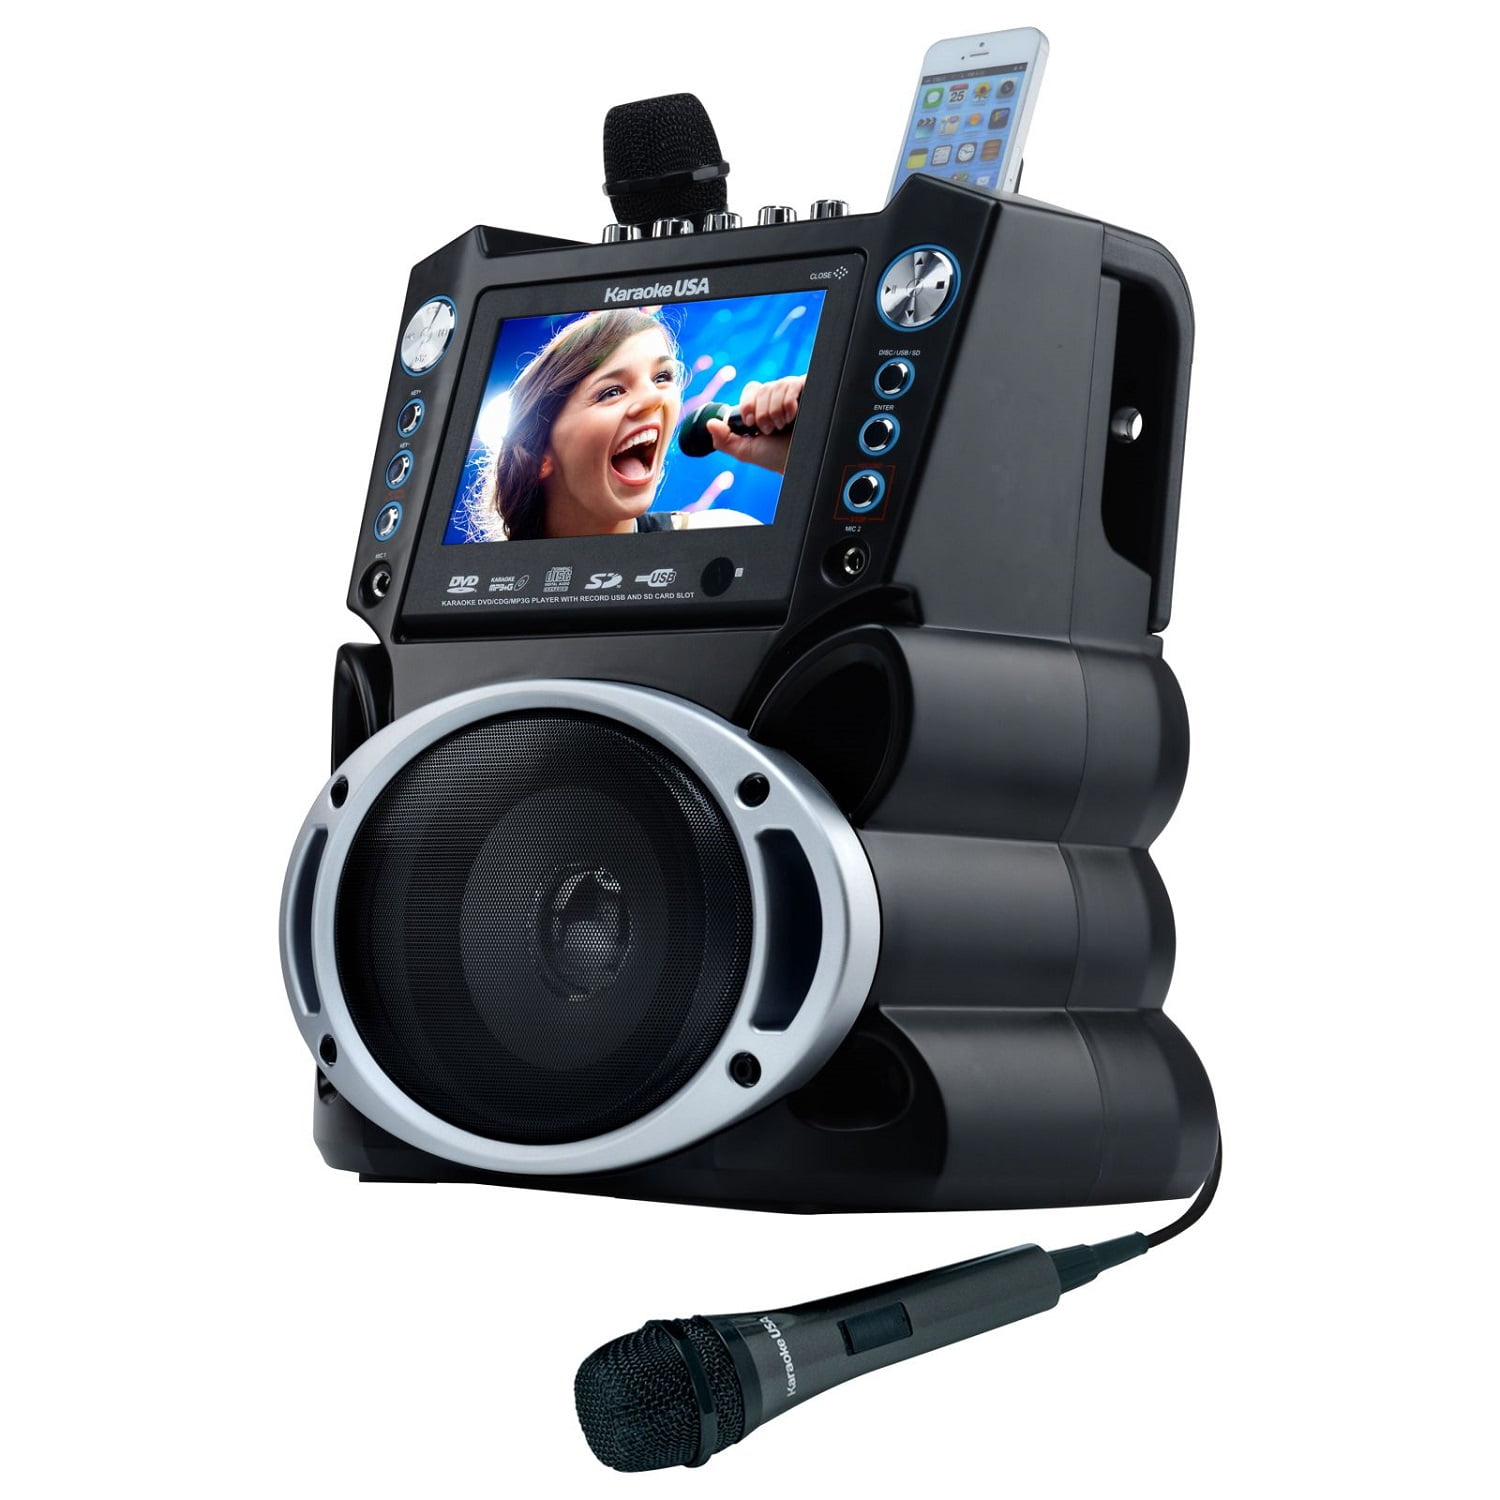 Karaoke USA DVD/CD+G/MP3+G System with 7 TFT Digital Color Screen,Record Function GF946 Bluetooth and HDMI Karaoke Player 